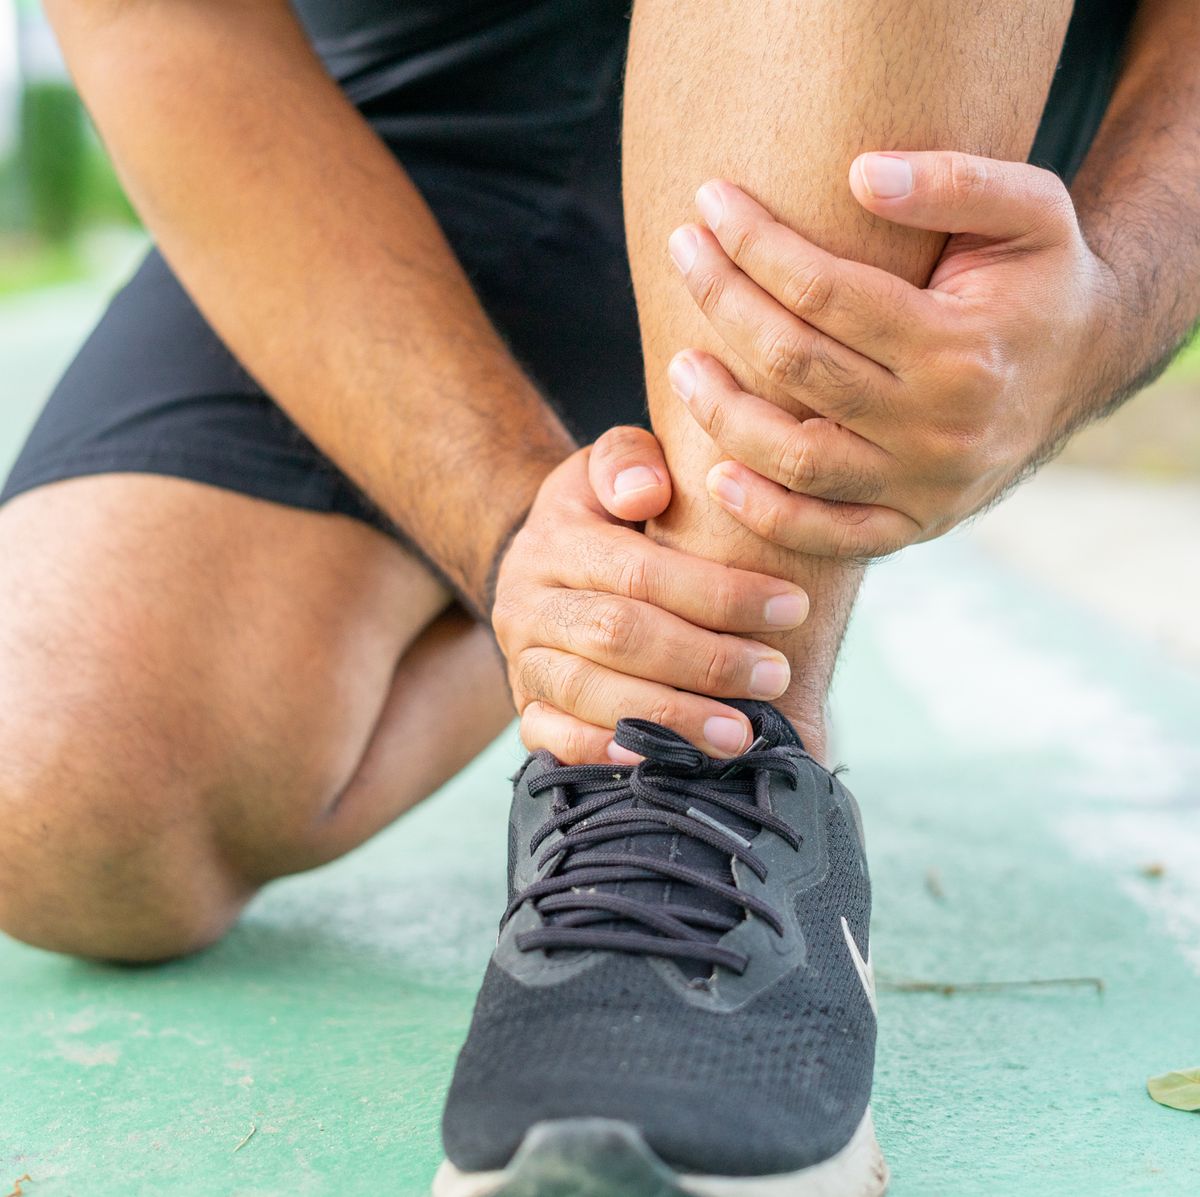 Ankle Sprains: The Best Prevention, Treatment, and Exercises